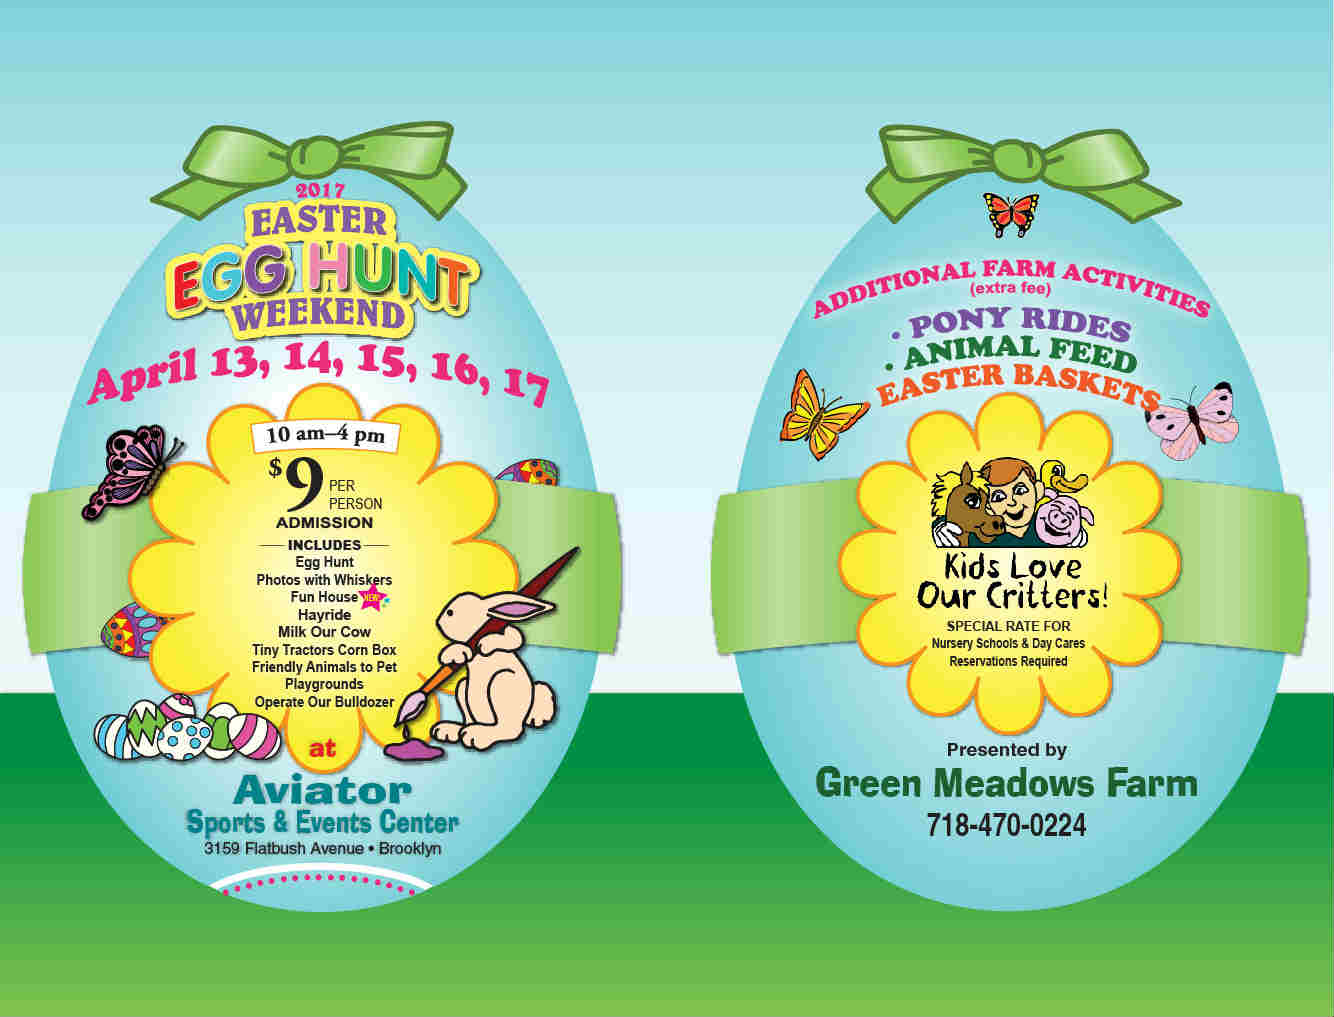 Green Meadows Farm Easter Egg Hunt Weekend at Aviator Sports and Events Center